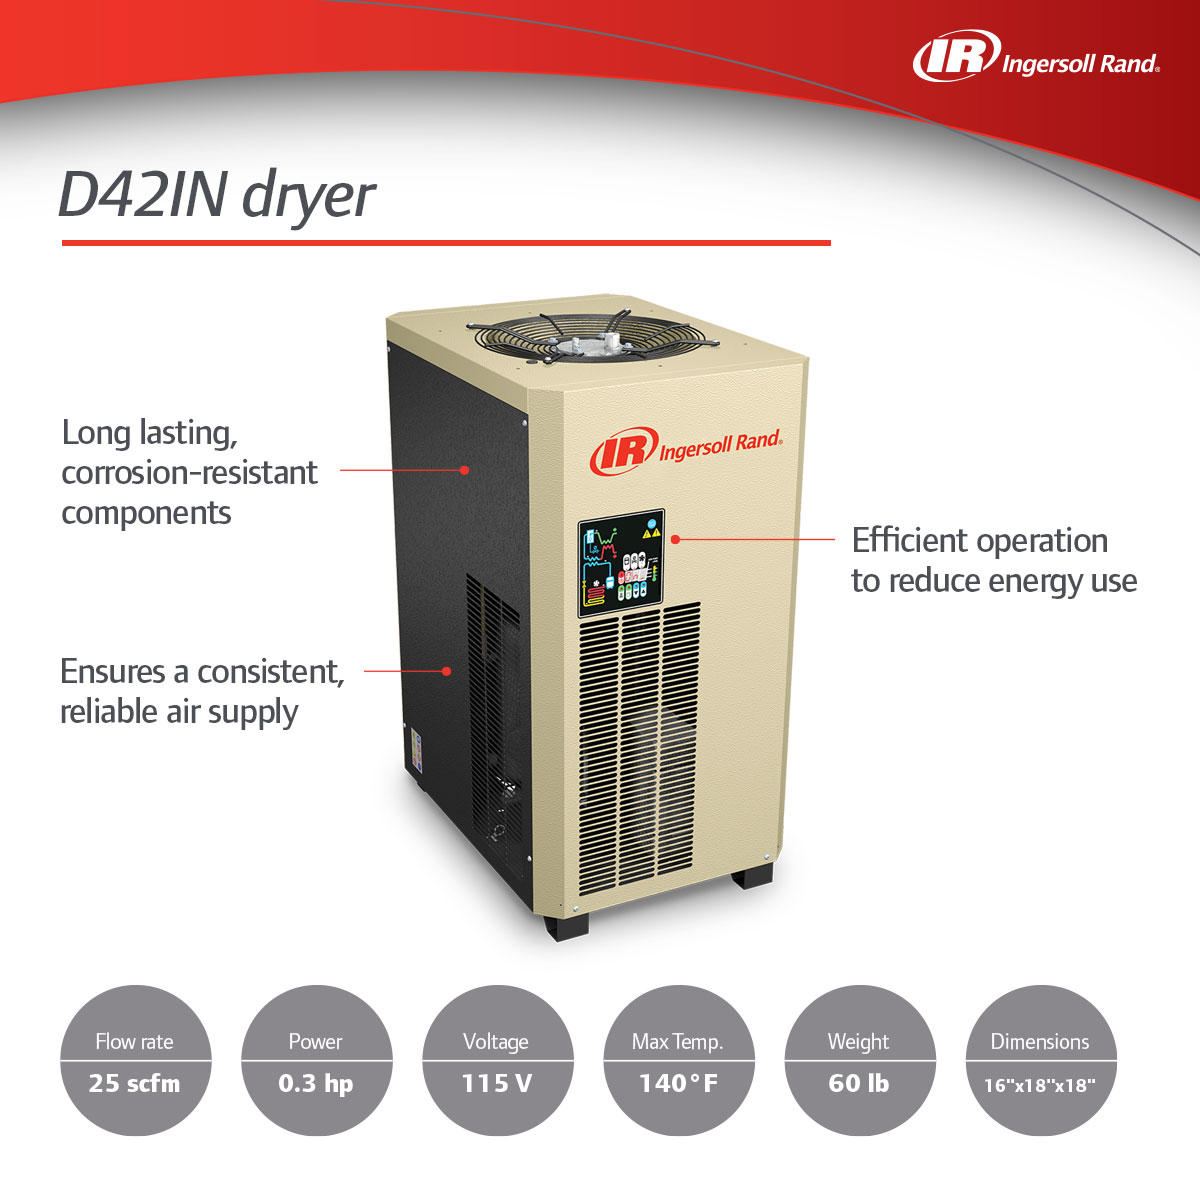 compressed air treatment D42INdryerspecs